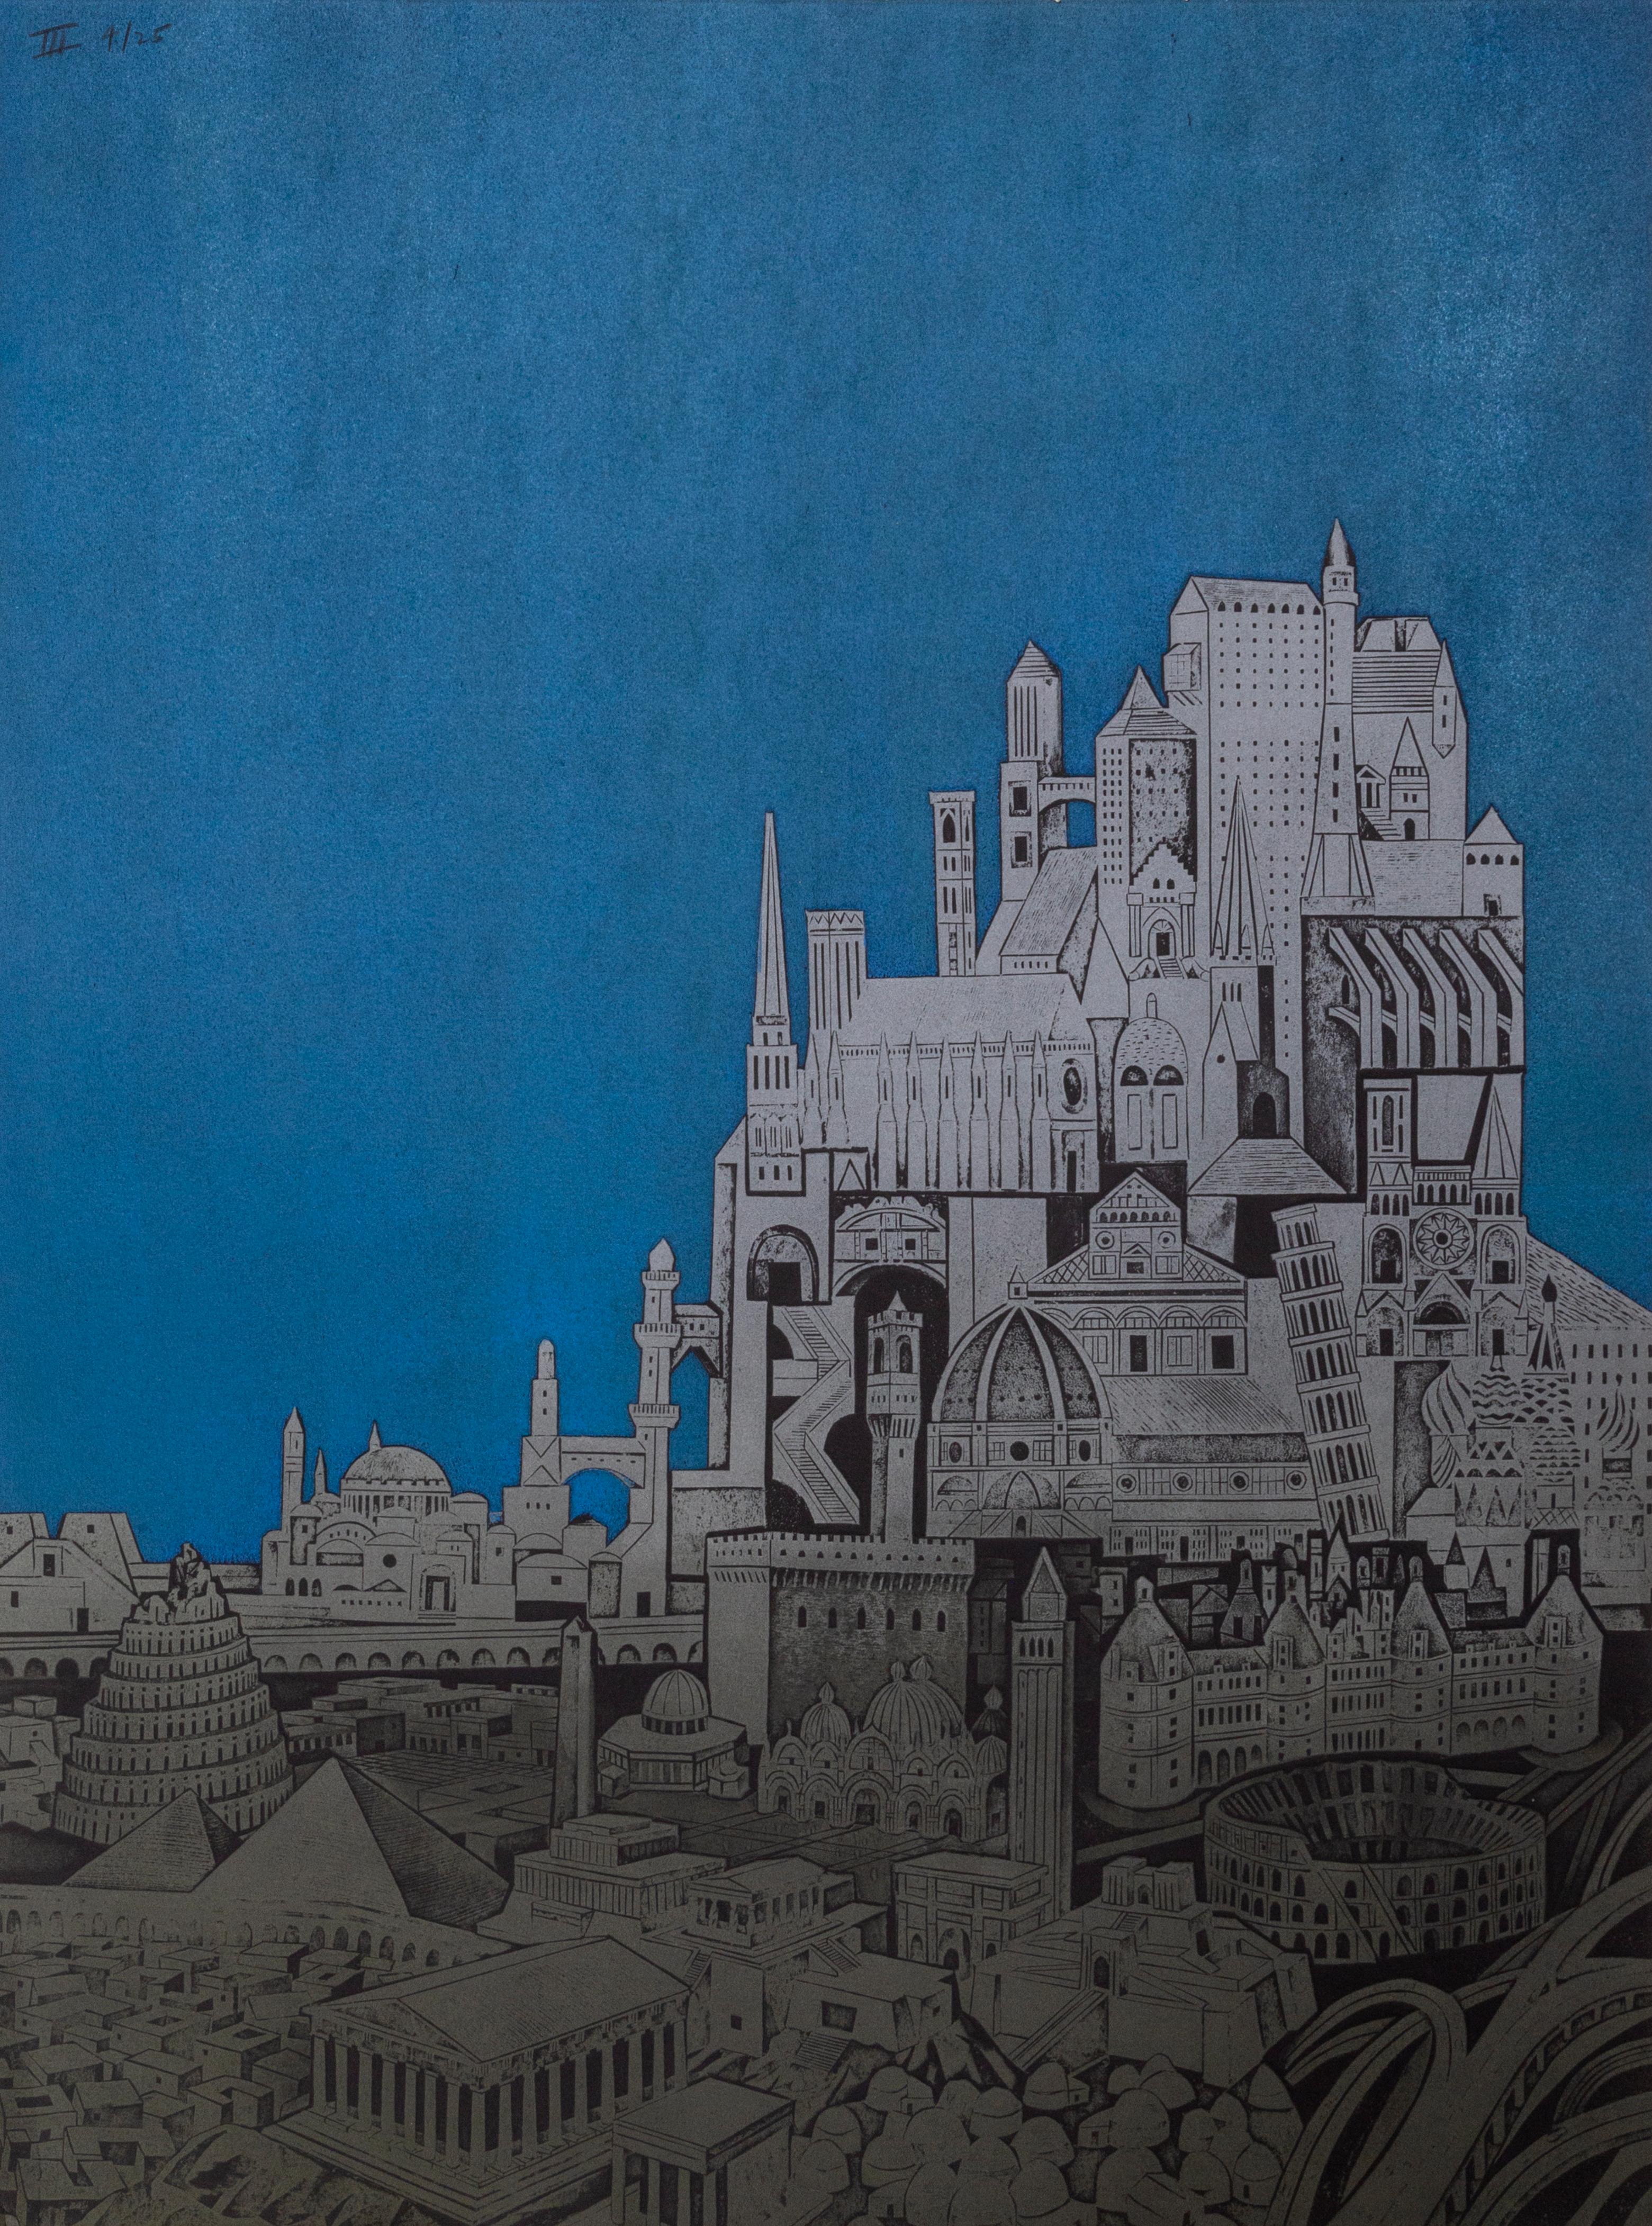 Artist: John Ross
Title: Homage to the City, Night
Medium: Collagraph Triptych, signed, numbered, and titled in pencil 
Edition: 4/25
Size: 29.5 x 22 in. (74.93 x 55.88 cm) Each